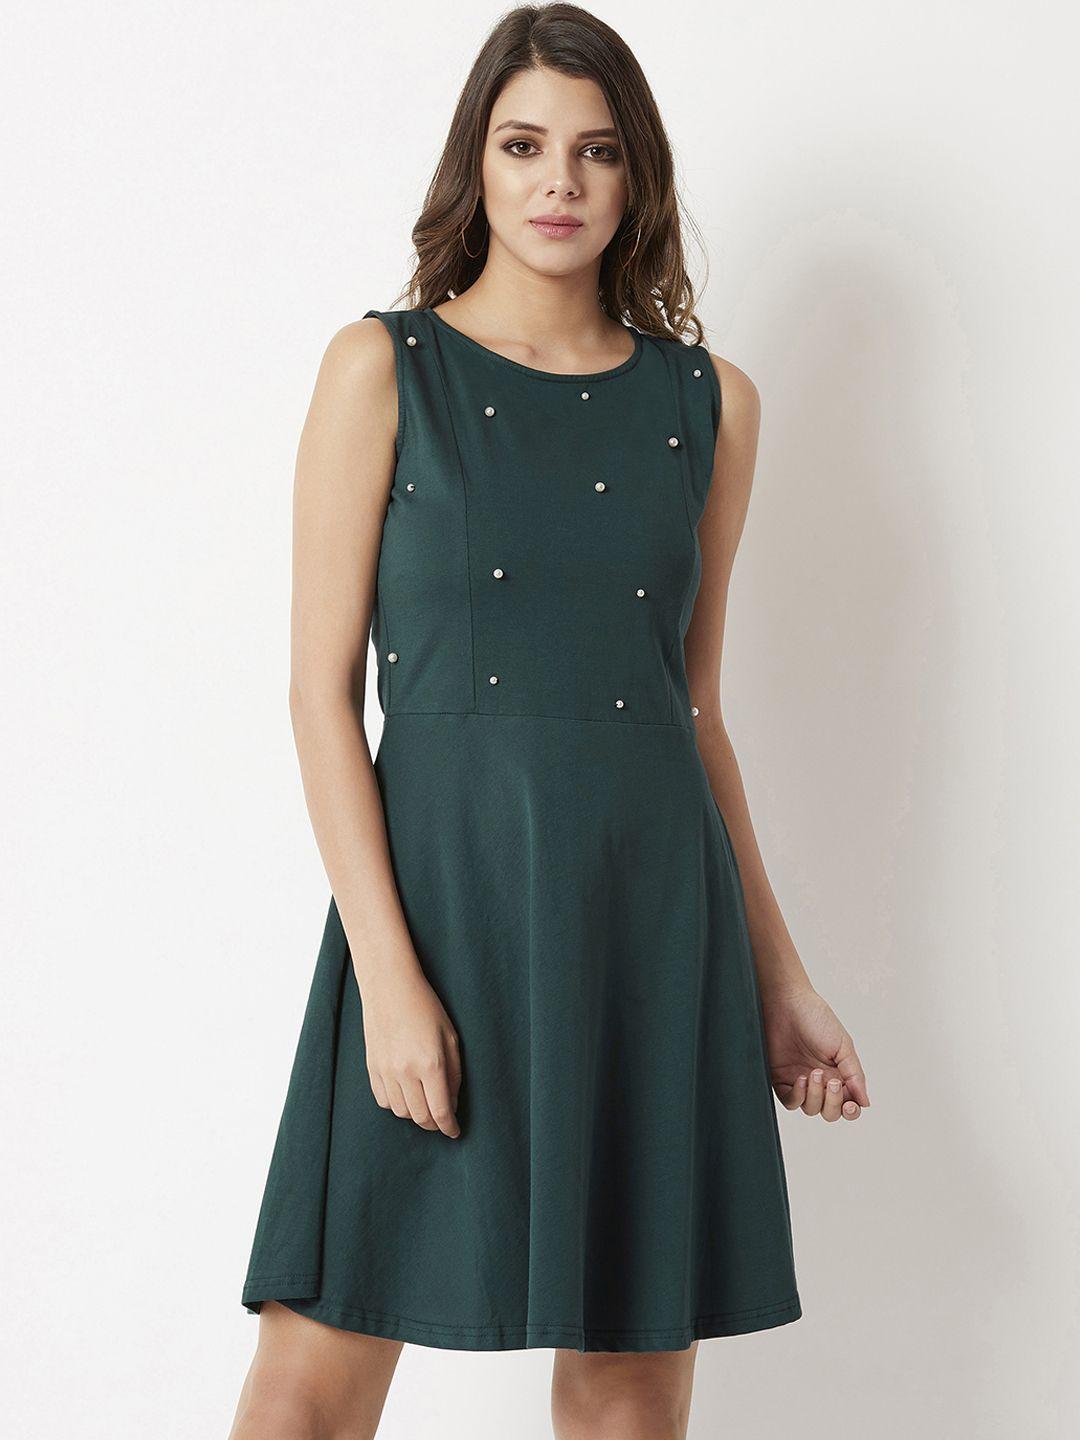 miss-chase-women-green-embellished-fit-and-flare-dress